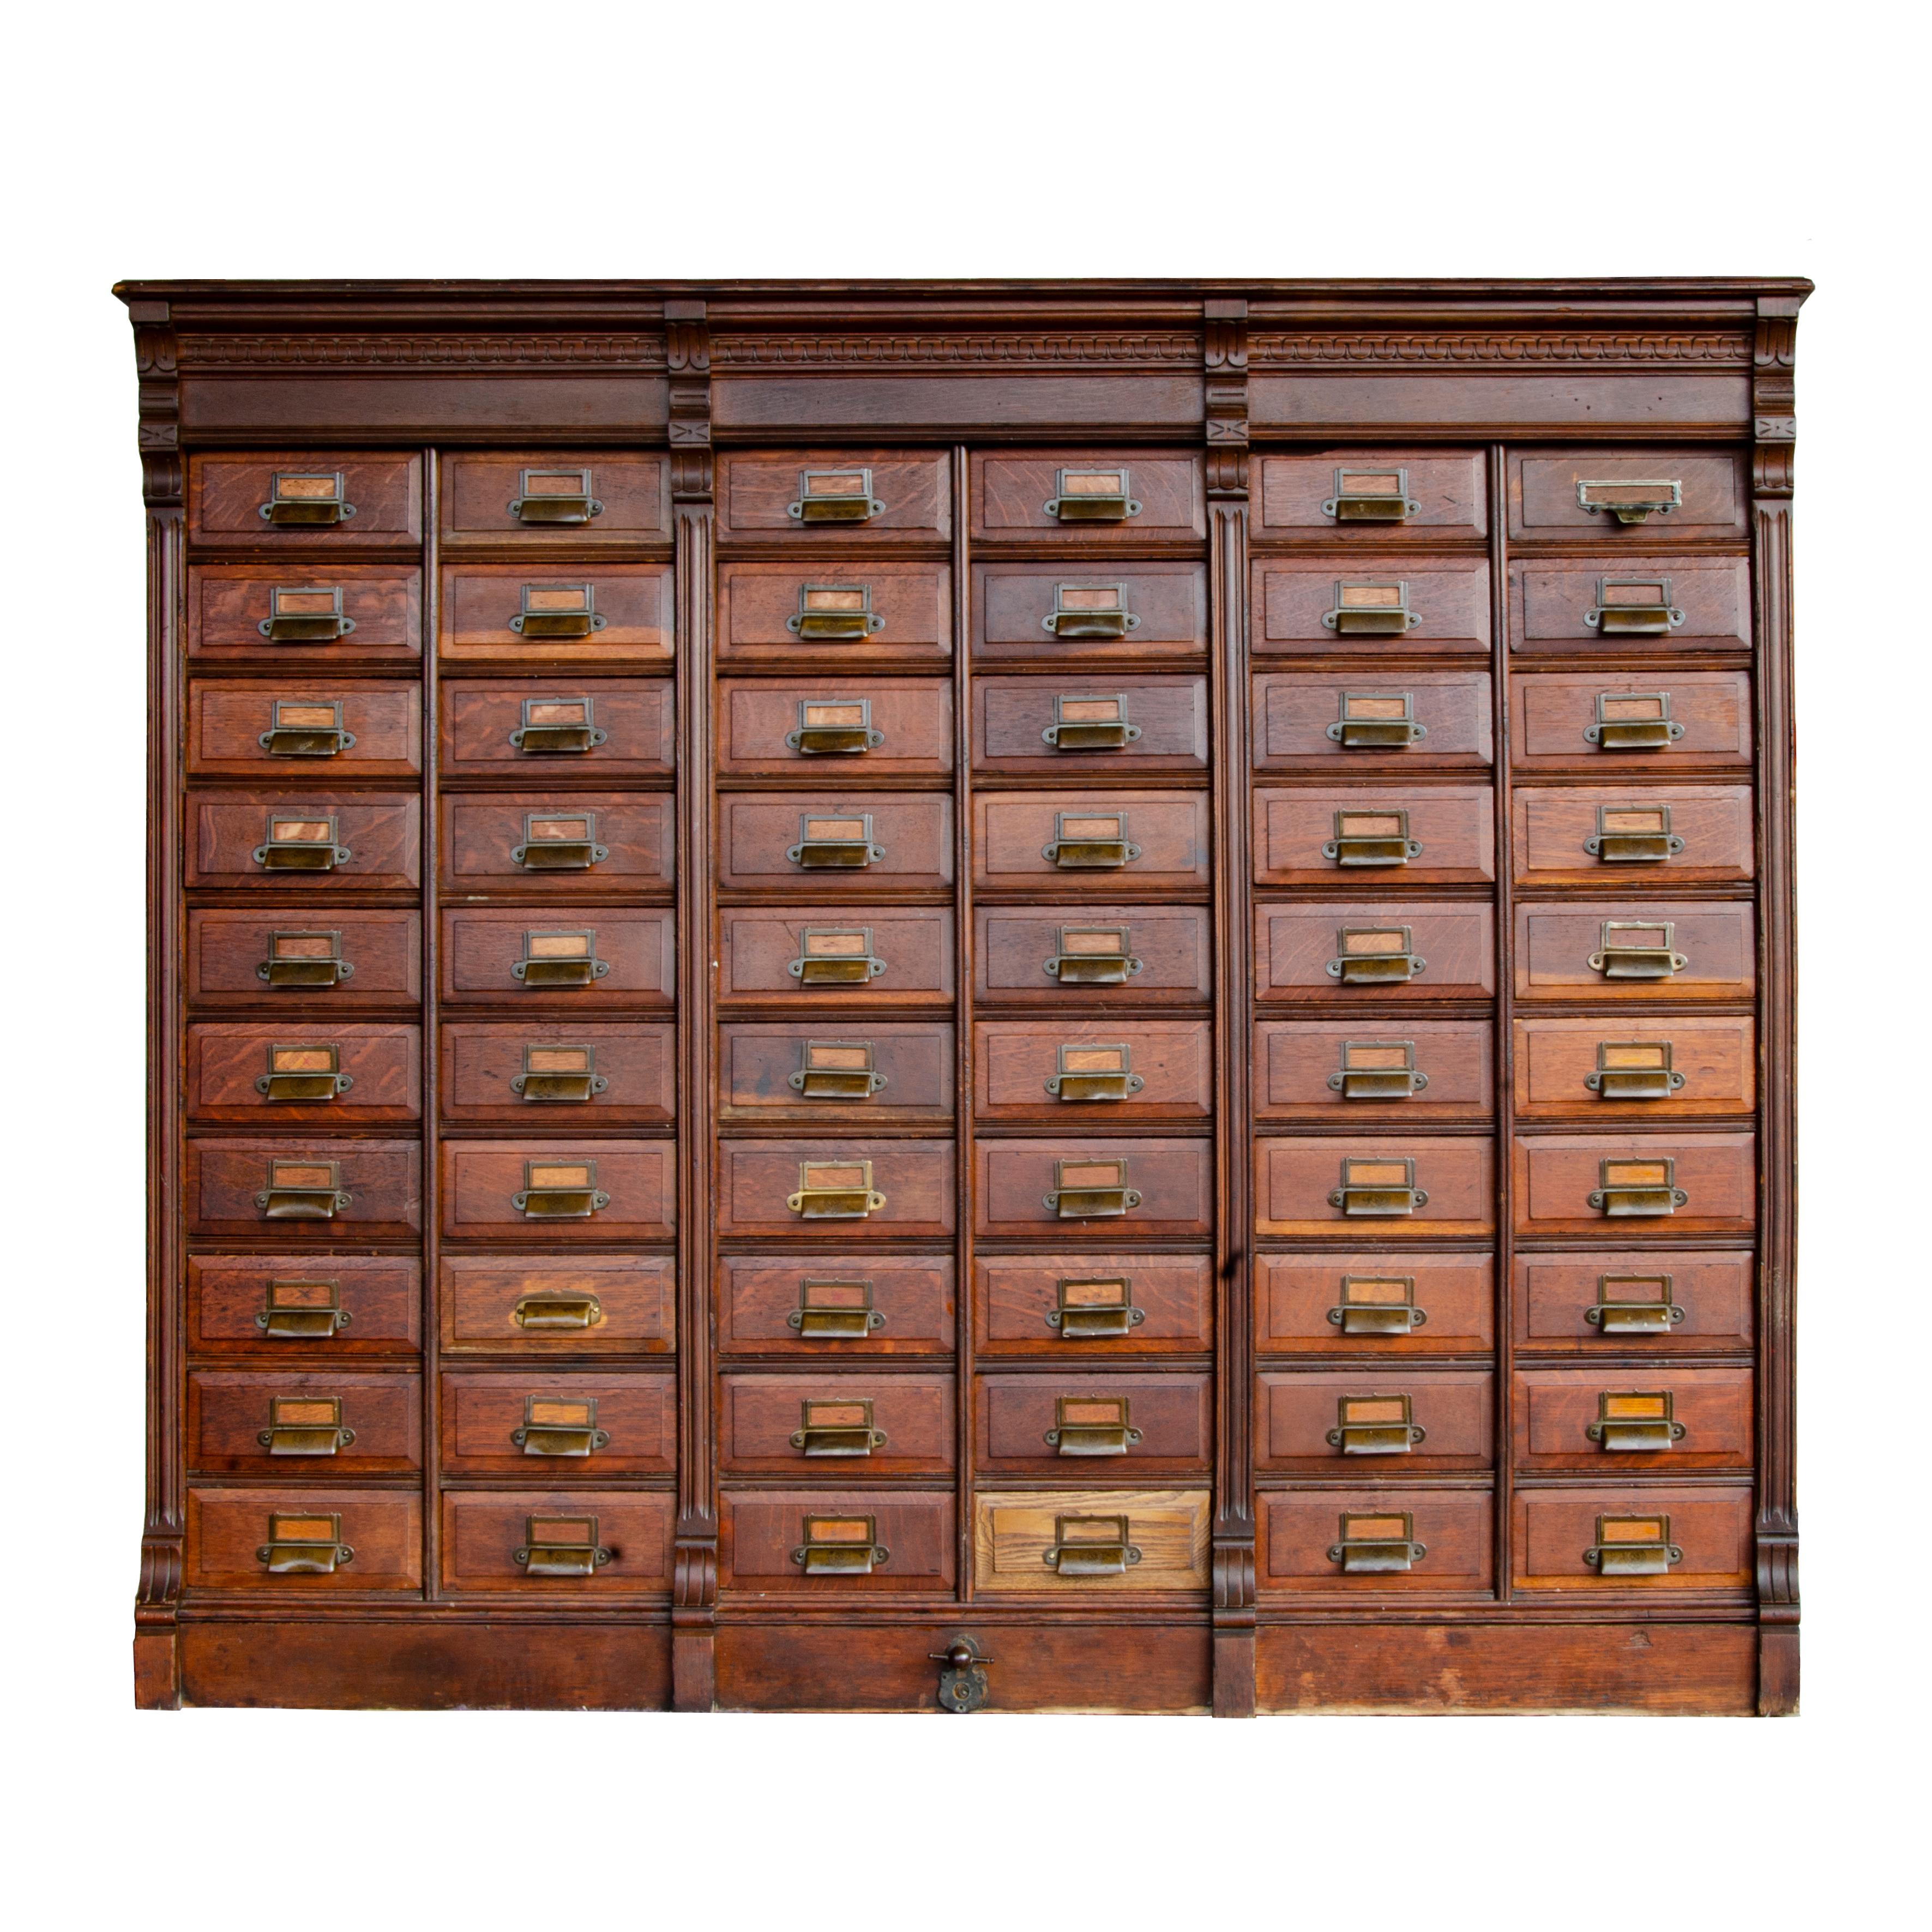 This magnificent multi-drawer cabinet is a handsome beast. Touches of detail in the reeded pilasters carved cornice nicely accent the piece’s brass bin pulls and fine oak graining. Manufactured by the Schlicht & Field Company, this piece is part of